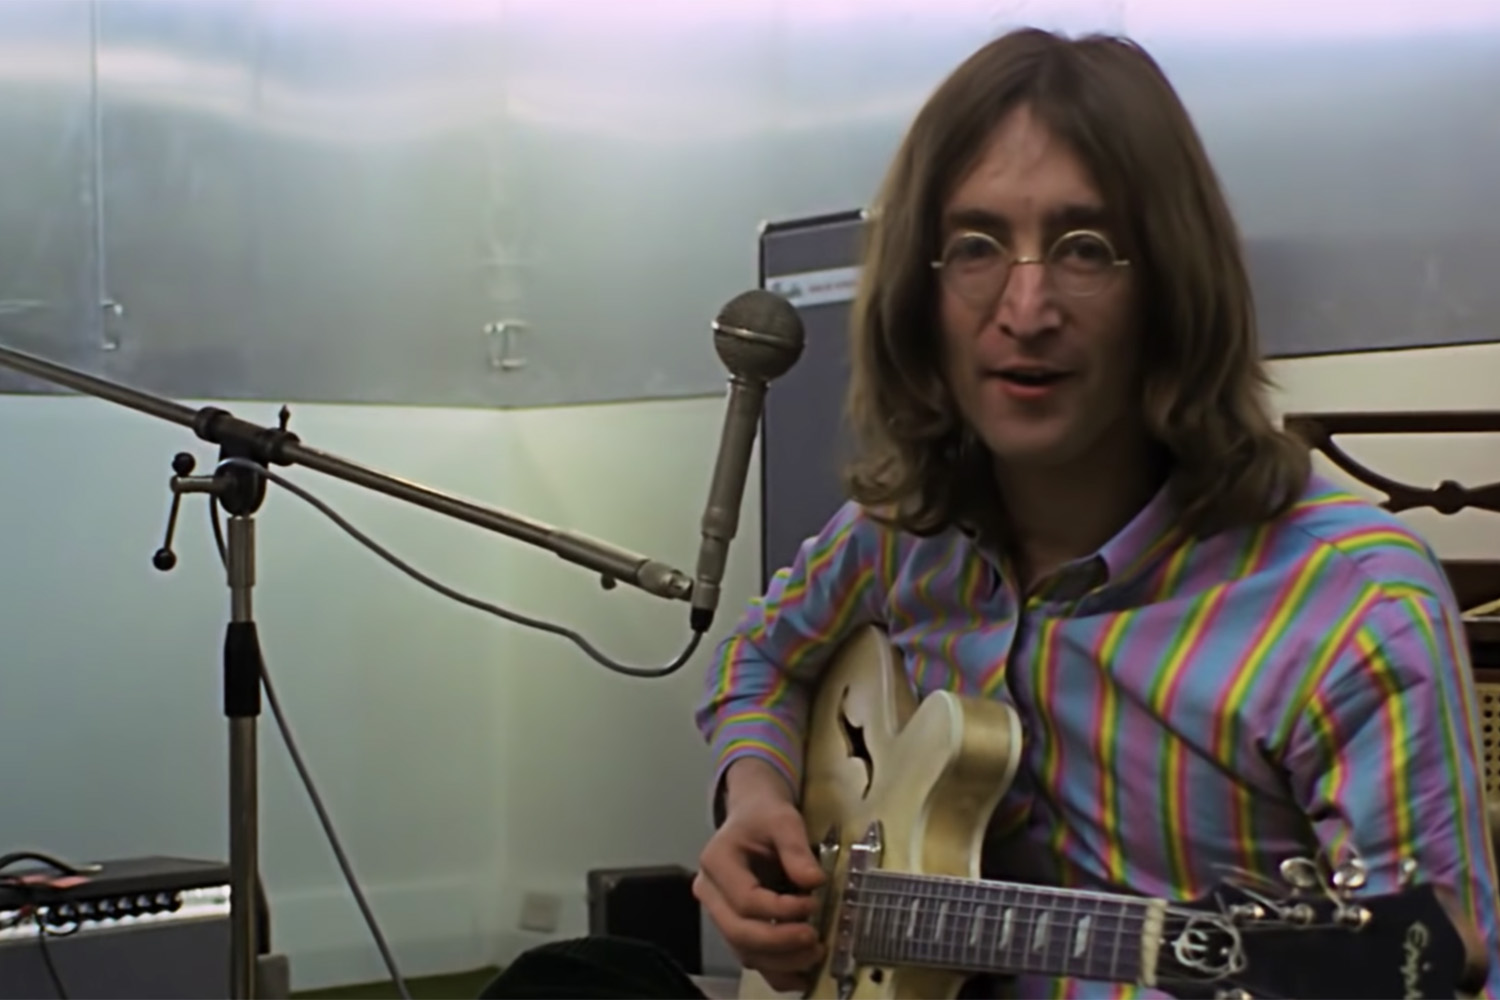 The 10 Coolest Pieces of Beatles Gear We Spotted in the “Get Back” Teaser